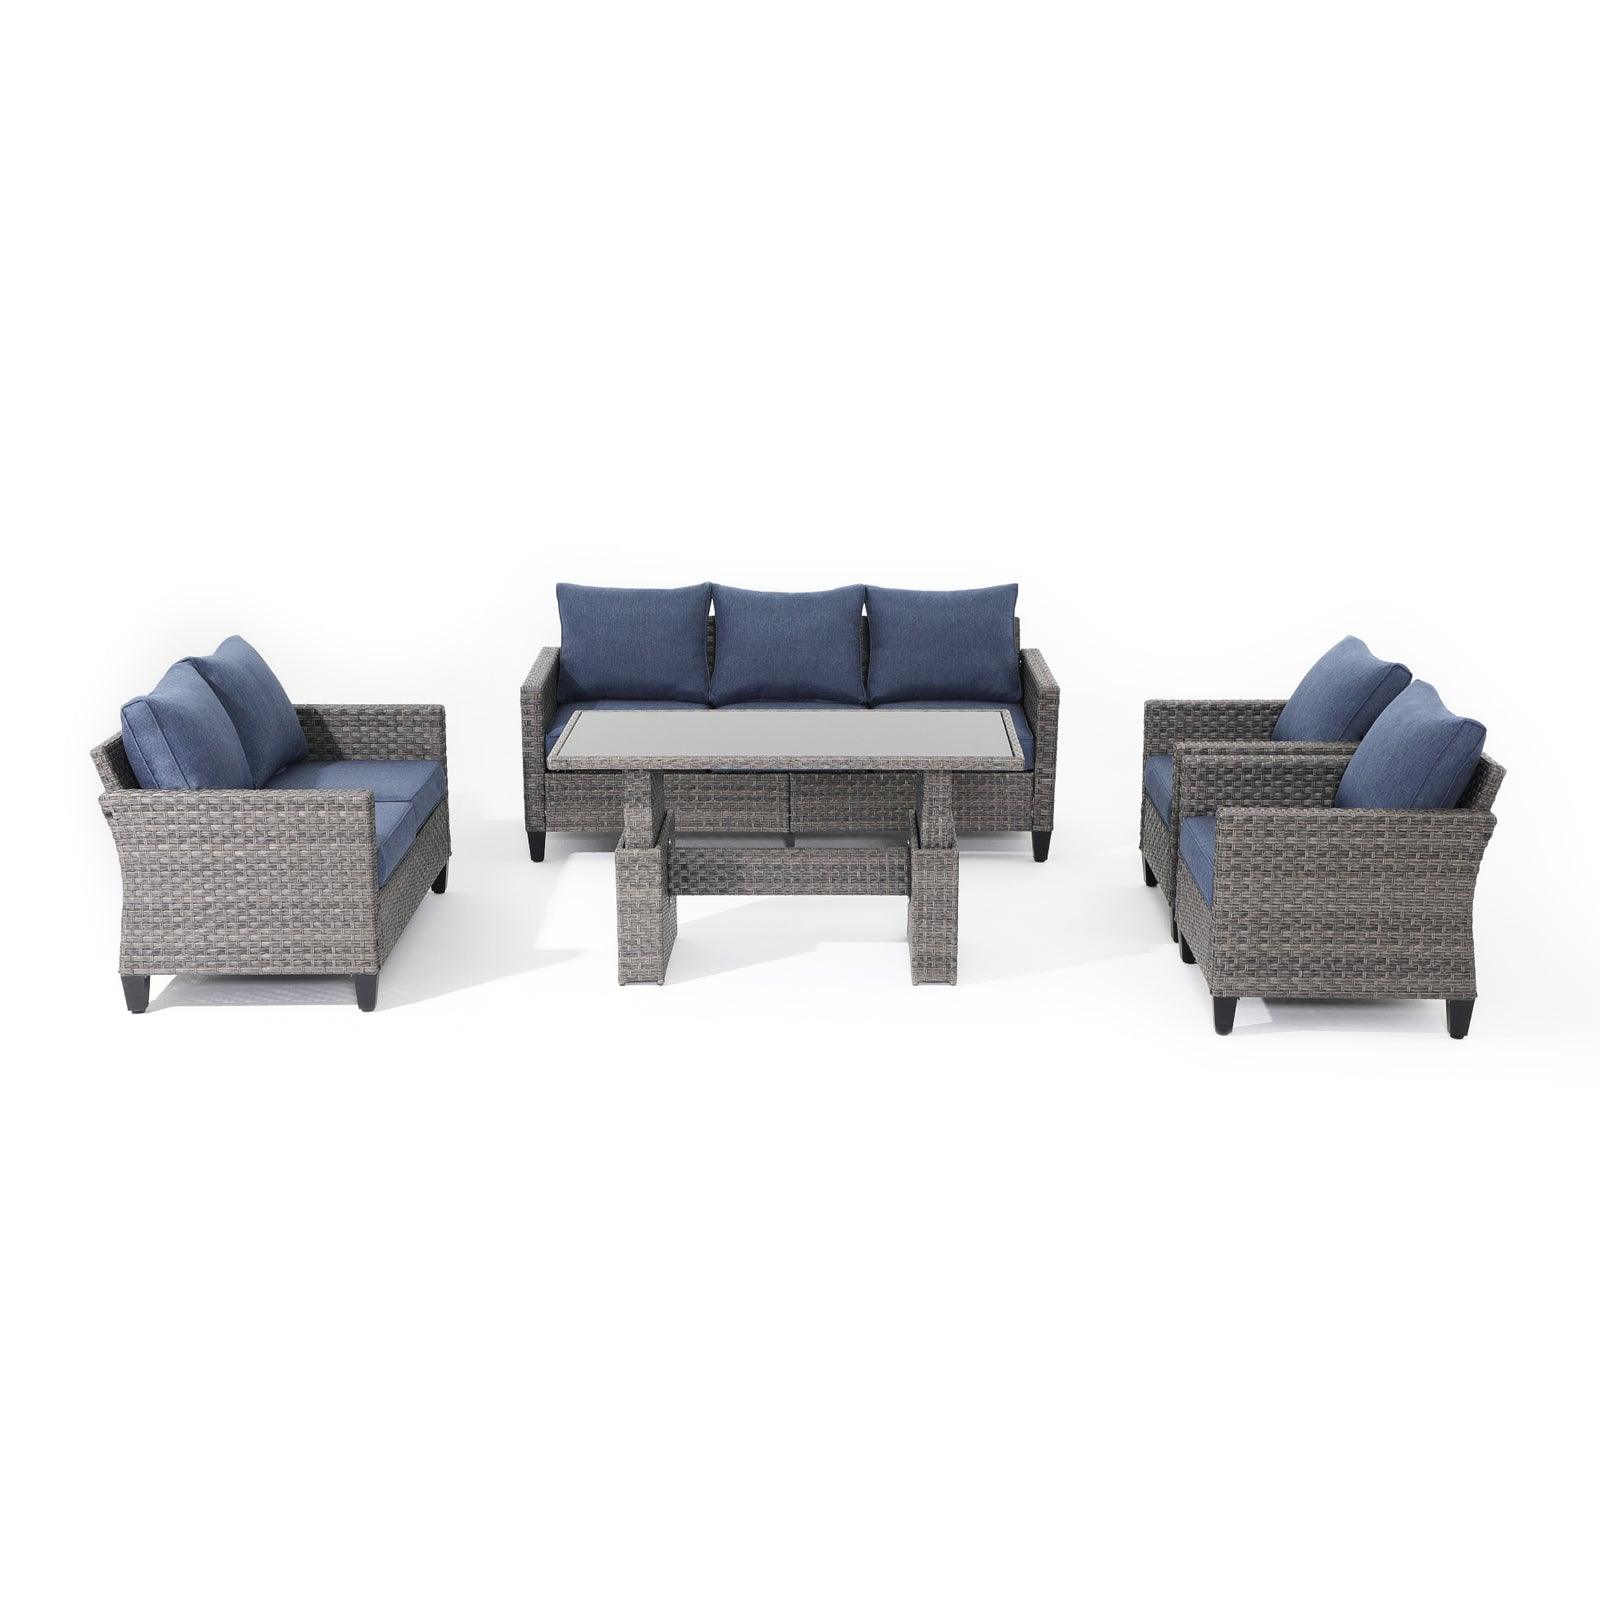 Ayia 5-Piece outdoor Sofa Set with Rattan design, Navy Blue cushions, a 3-seater sofa, 2 arm chairs , 1 loveseat, 1 multifunctional lift-top dining table - Jardina Furniture #color_Navy blue#piece_5-pc. with table